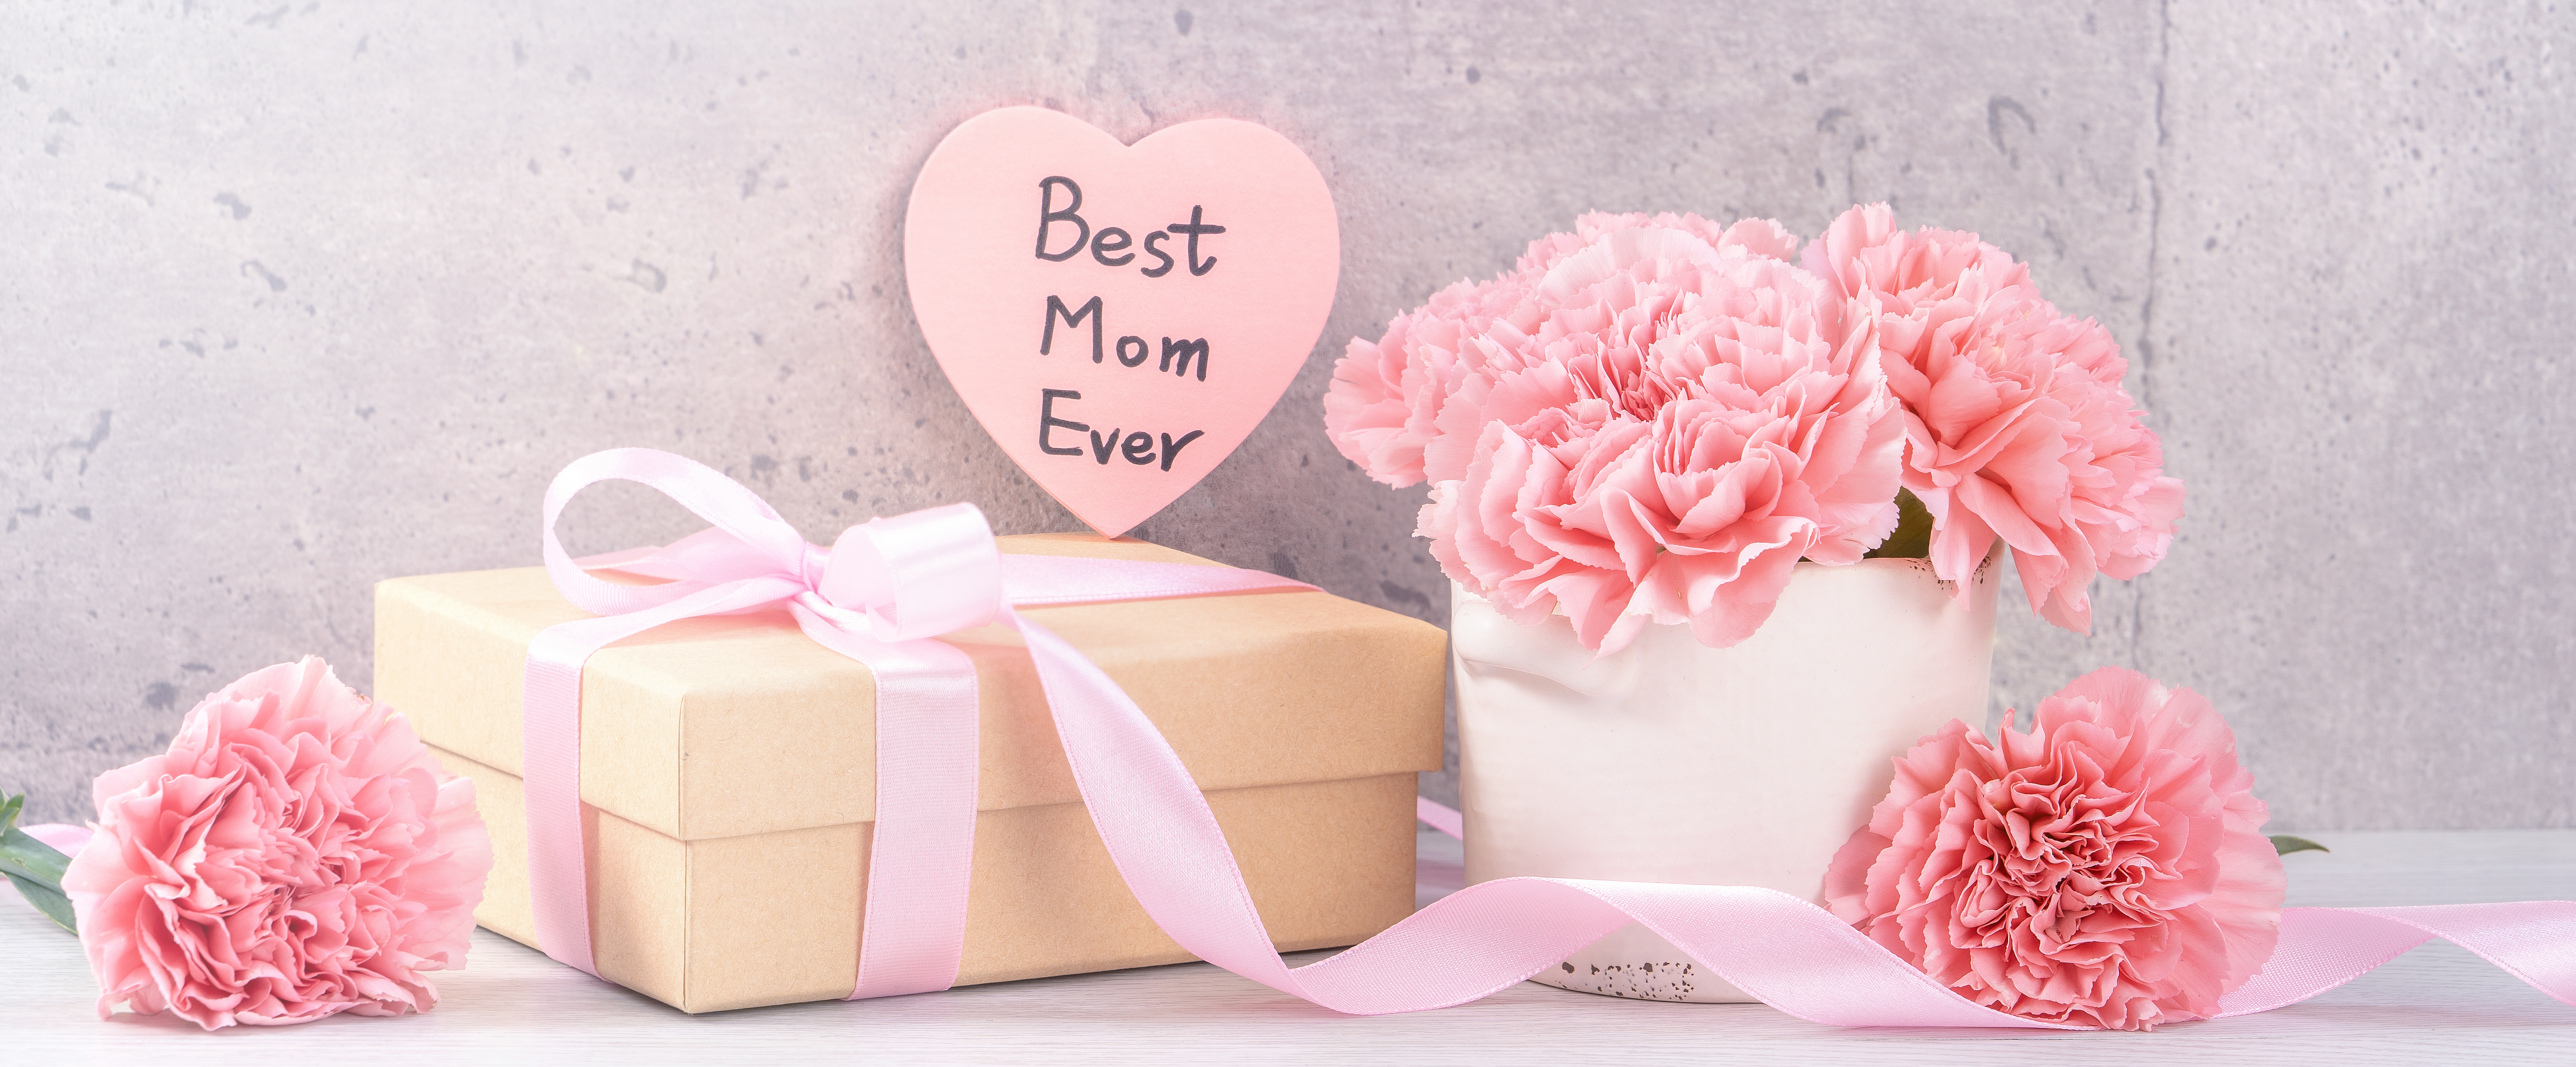 10 Best Gifts for Mother's Day